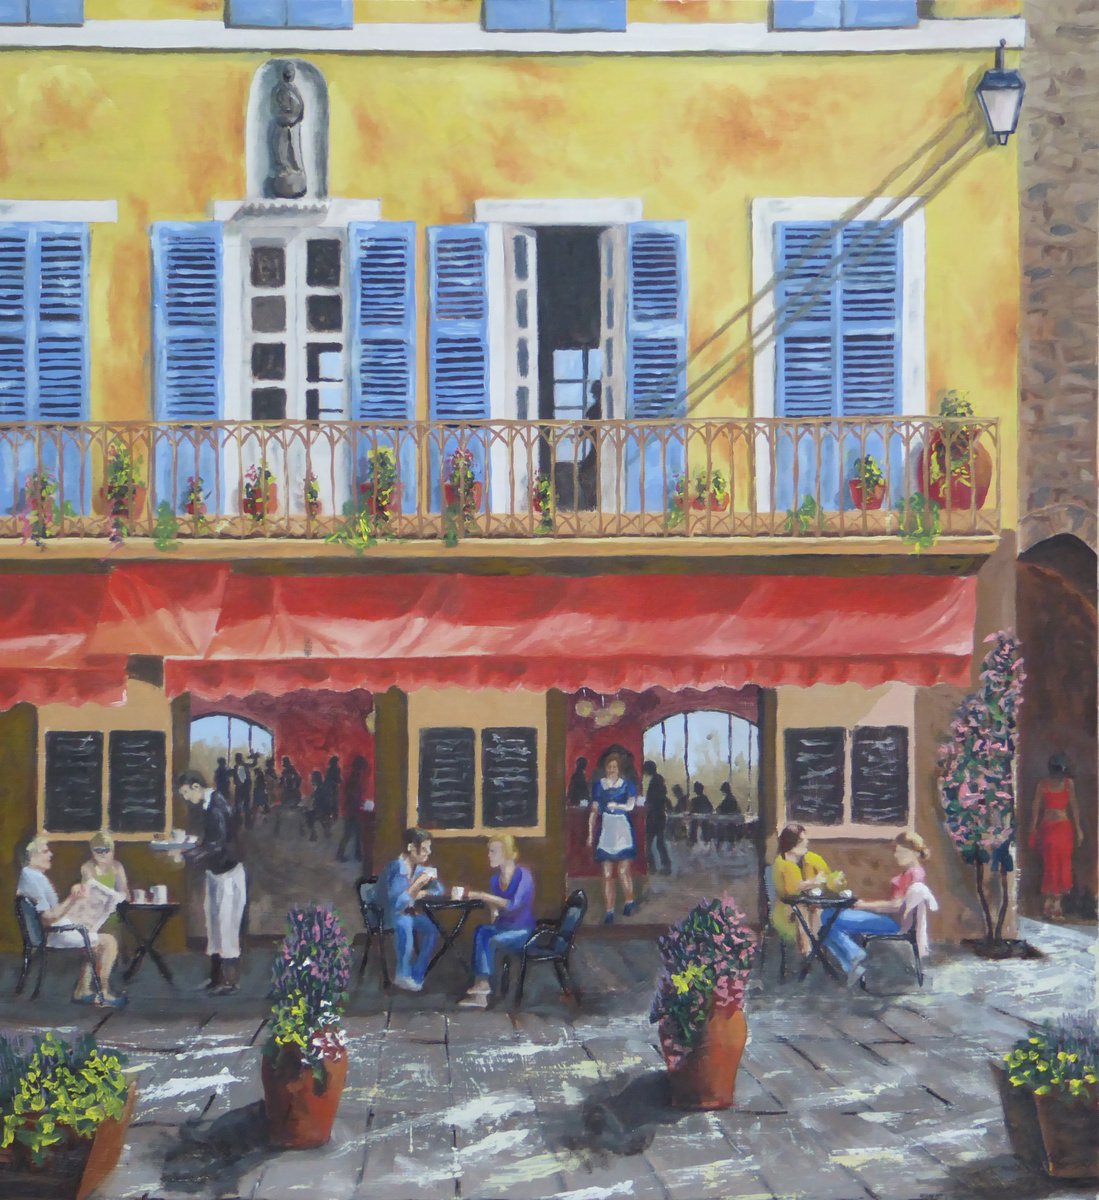 Restaurant Scene in Provence, France by Mike Dudfield